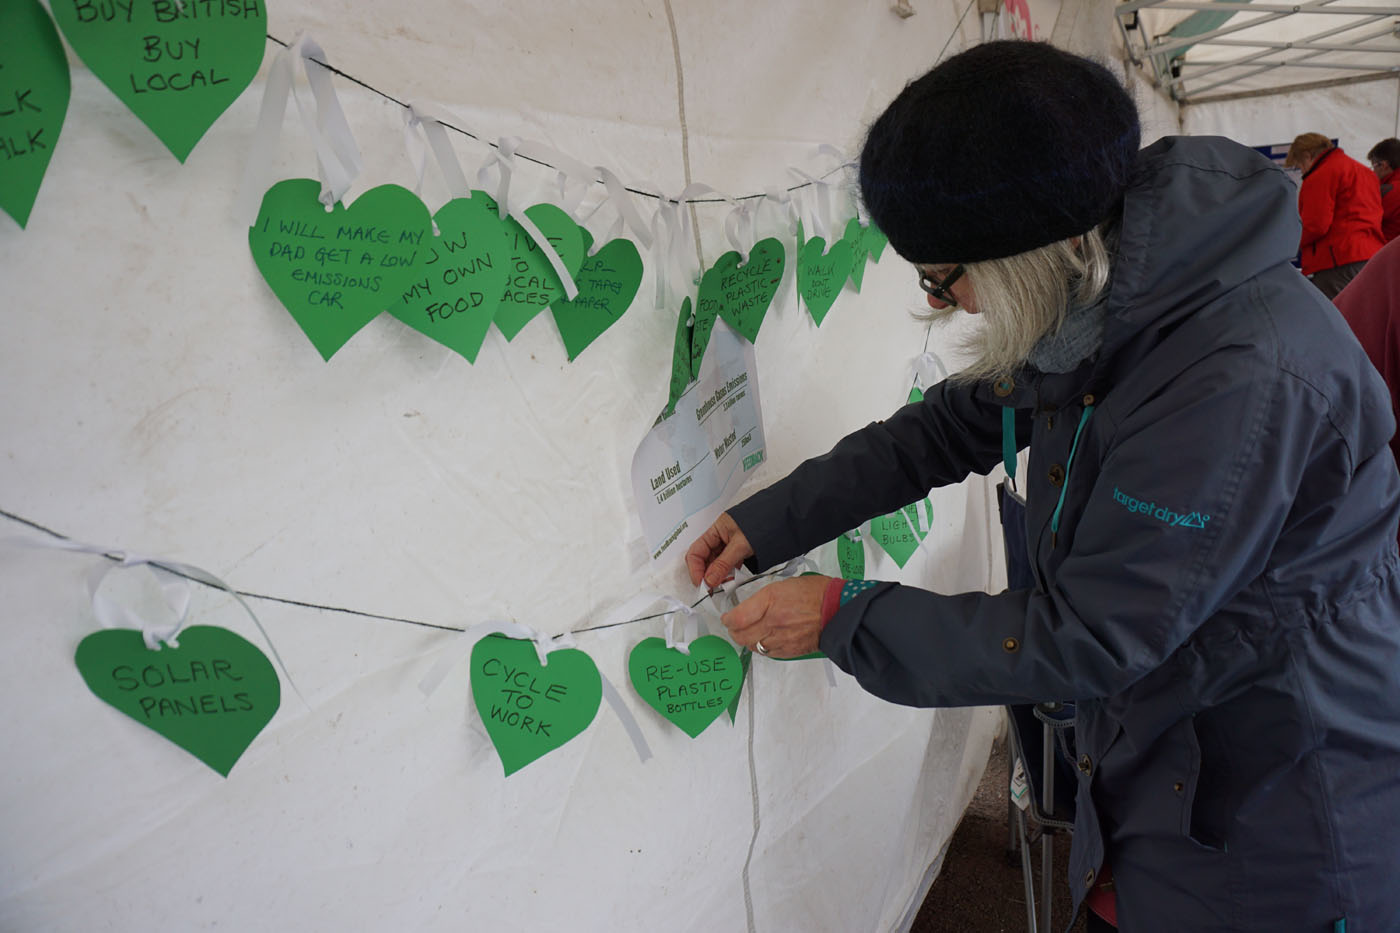 Photograph of a string of pledges written on green hearts